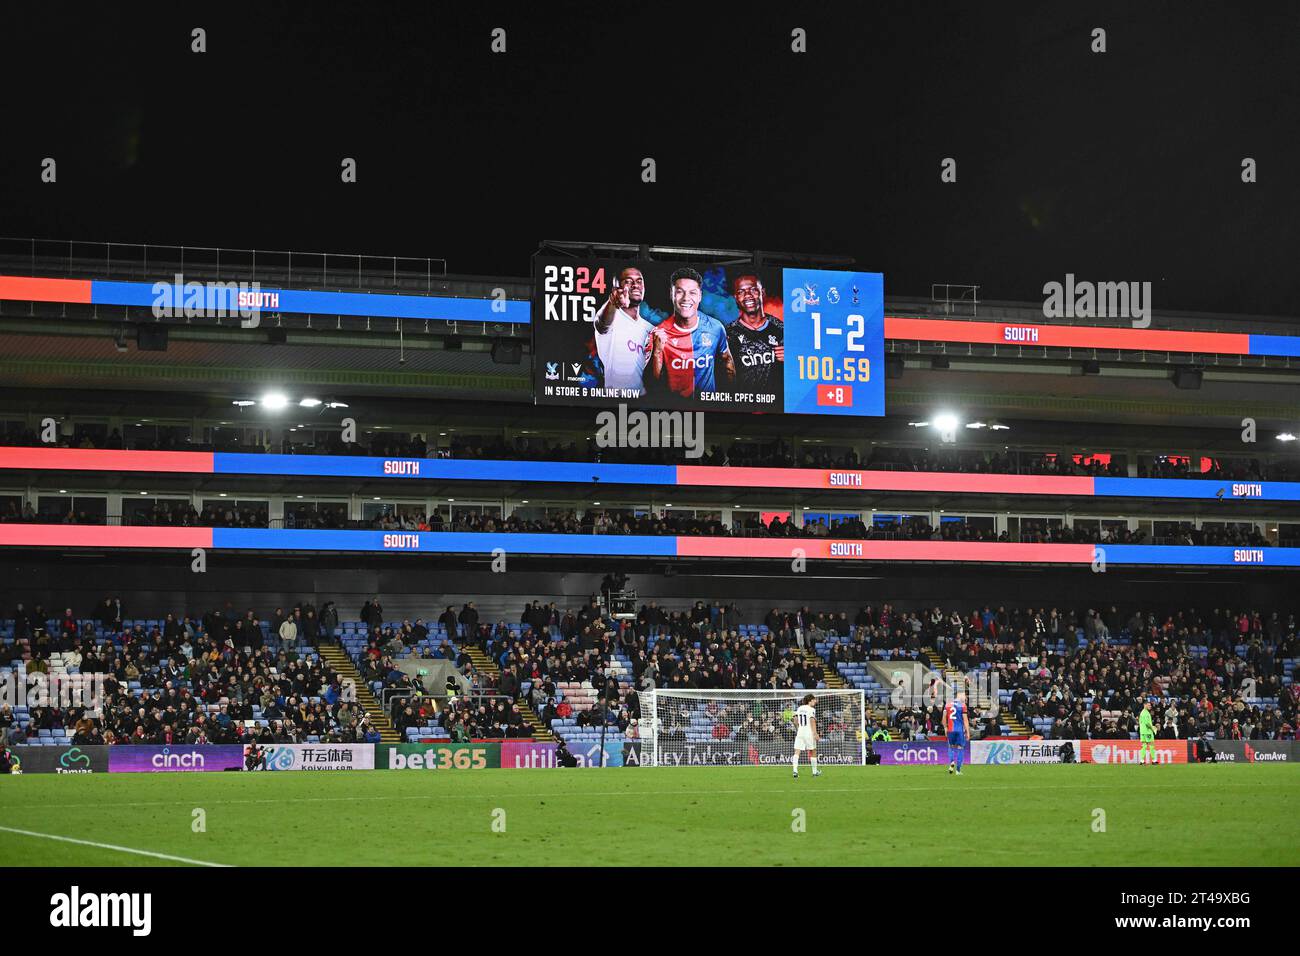 LONDON, ENGLAND - OCTOBER 27:  Scoreboard during the Premier League match between Crystal Palace and Tottenham Hotspur at Selhurst Park on October 27, Stock Photo